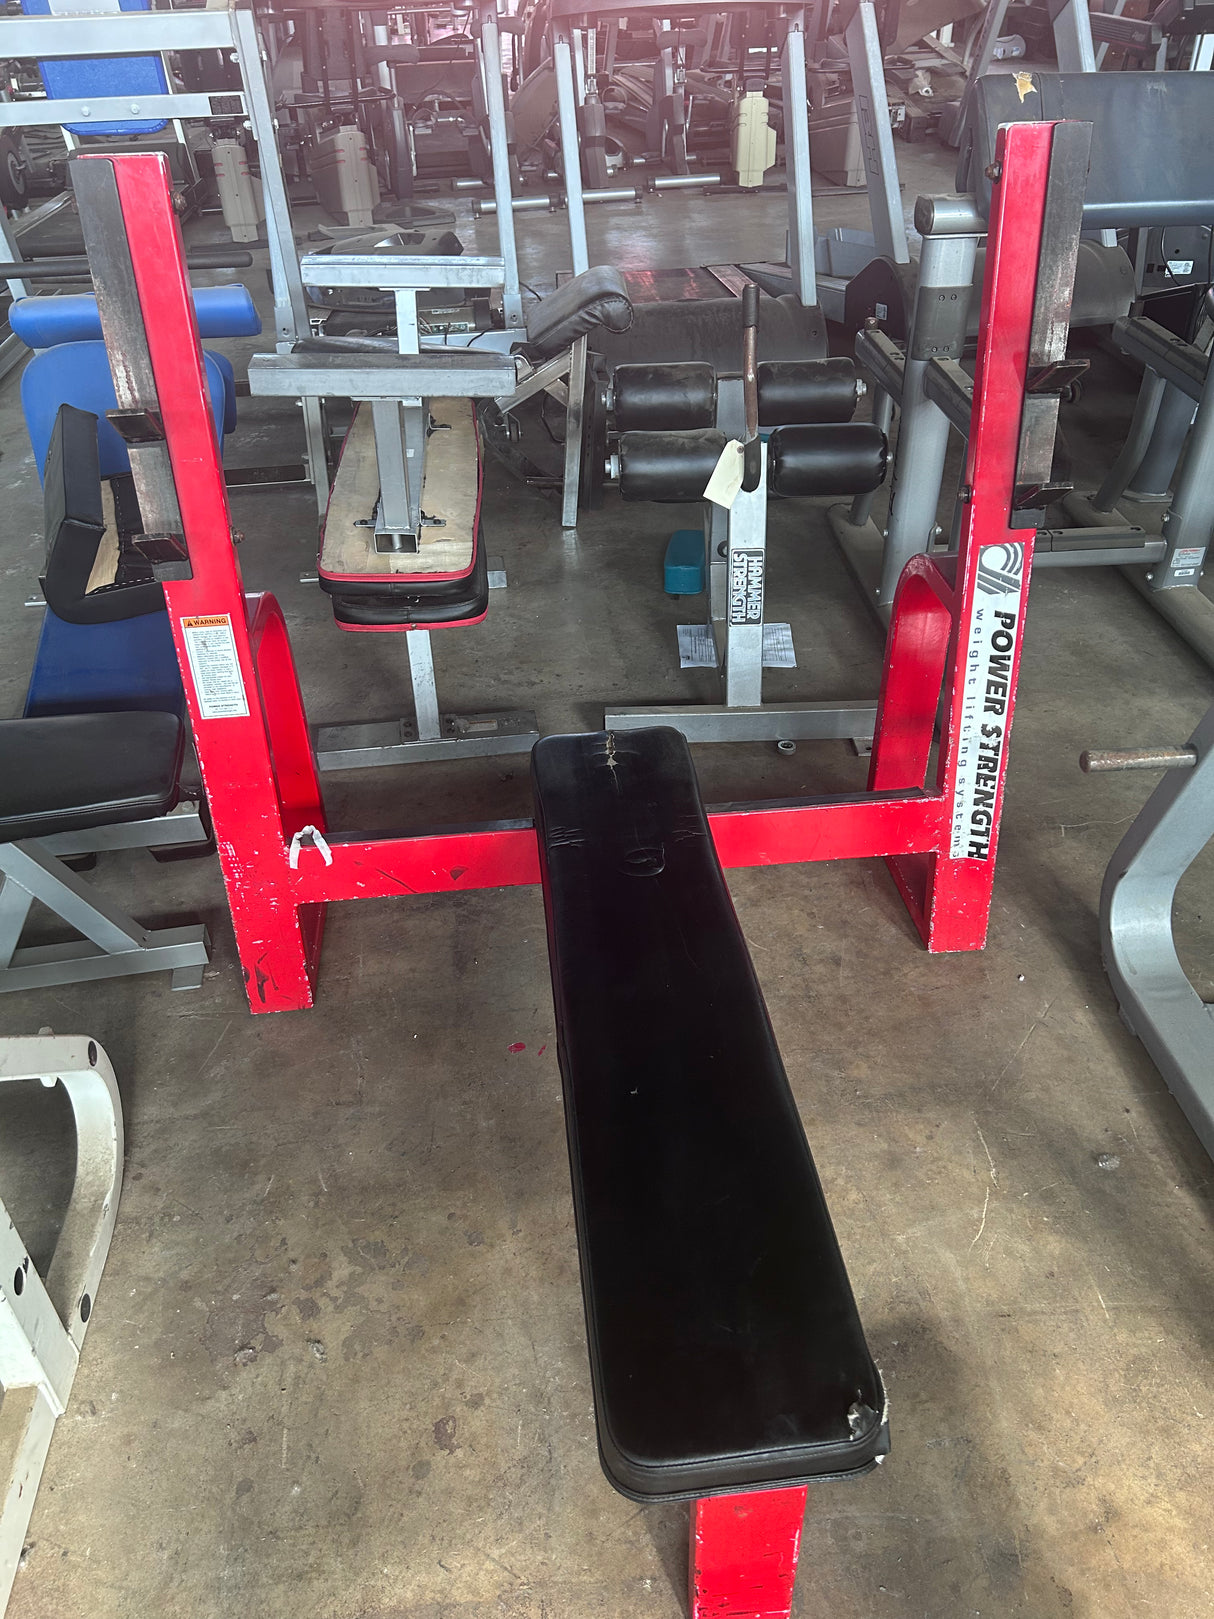 Pre-Owned Power Strength Flat Olympic Bench Press - ExerciseUnlimited